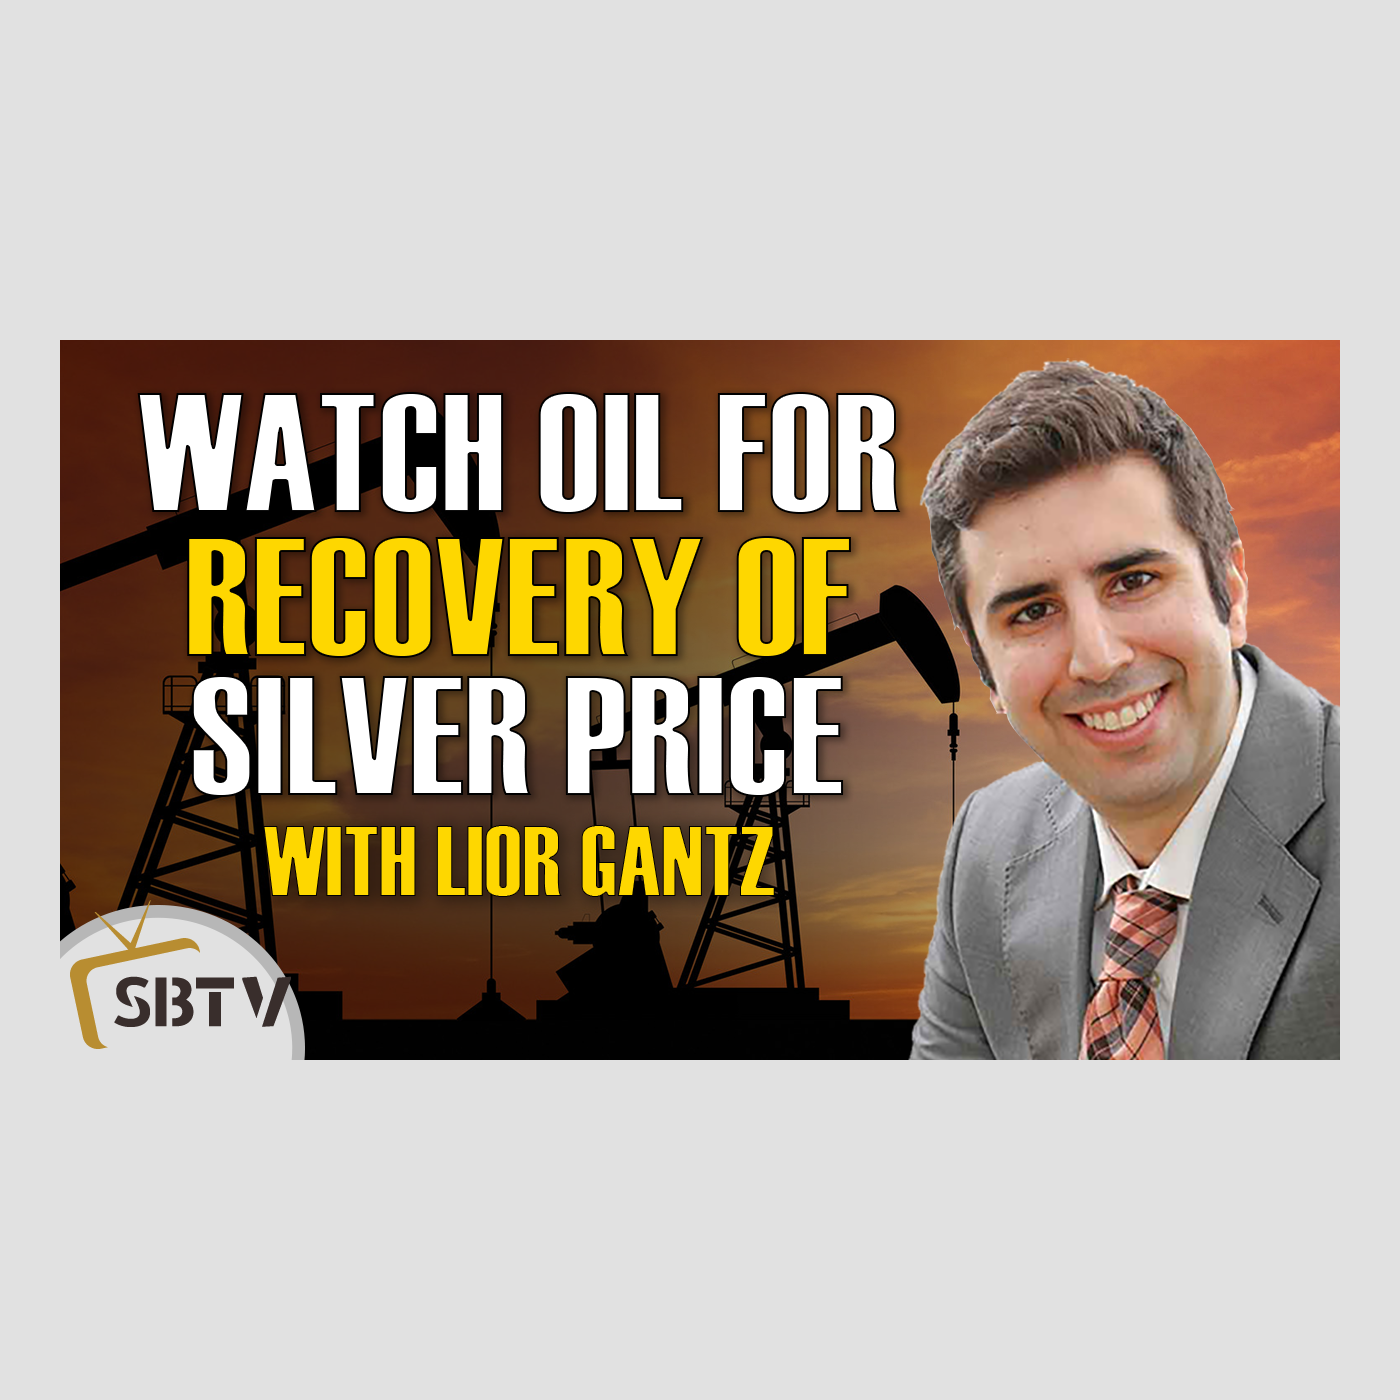 106 Lior Gantz - Watch Oil For Recovery of Silver Price